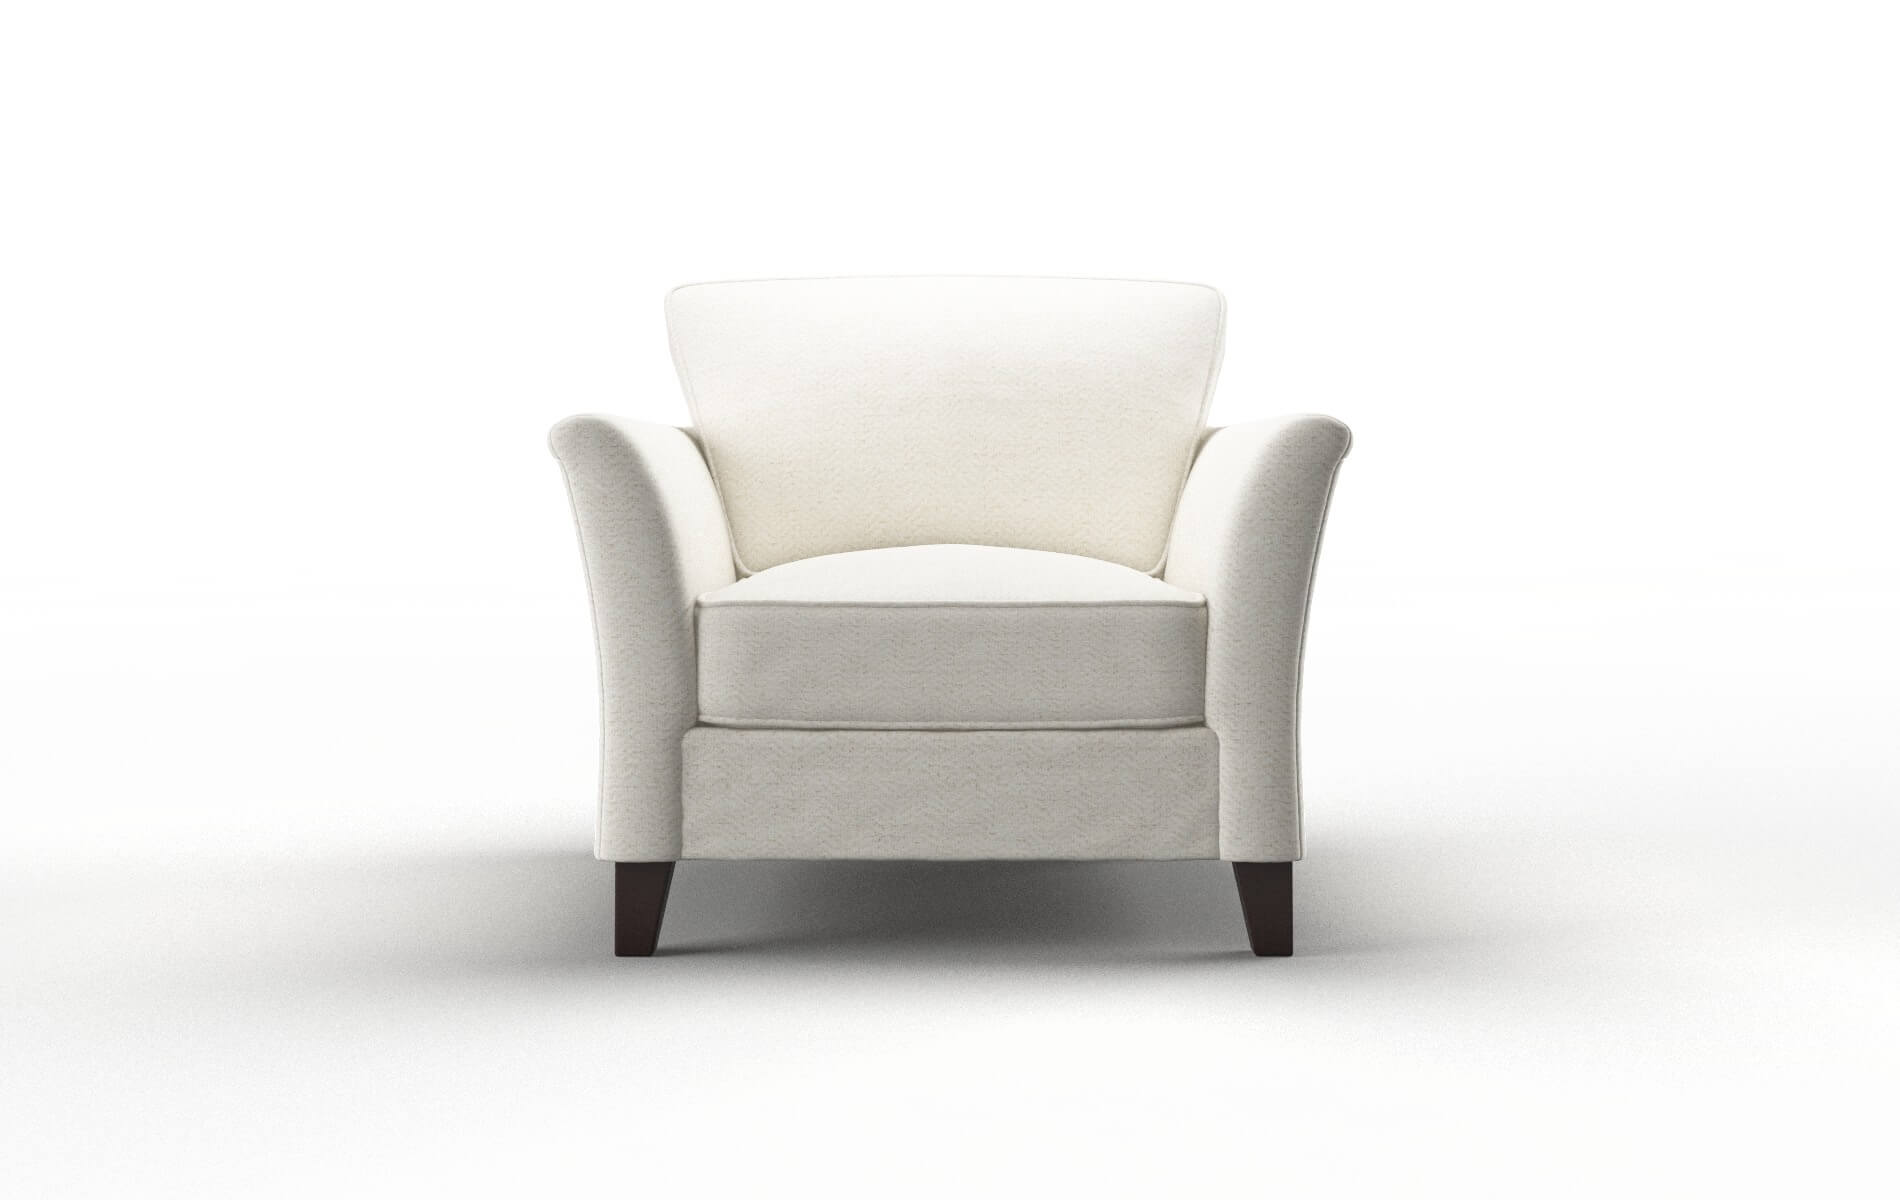 Cologne Catalina Ivory chair espresso legs